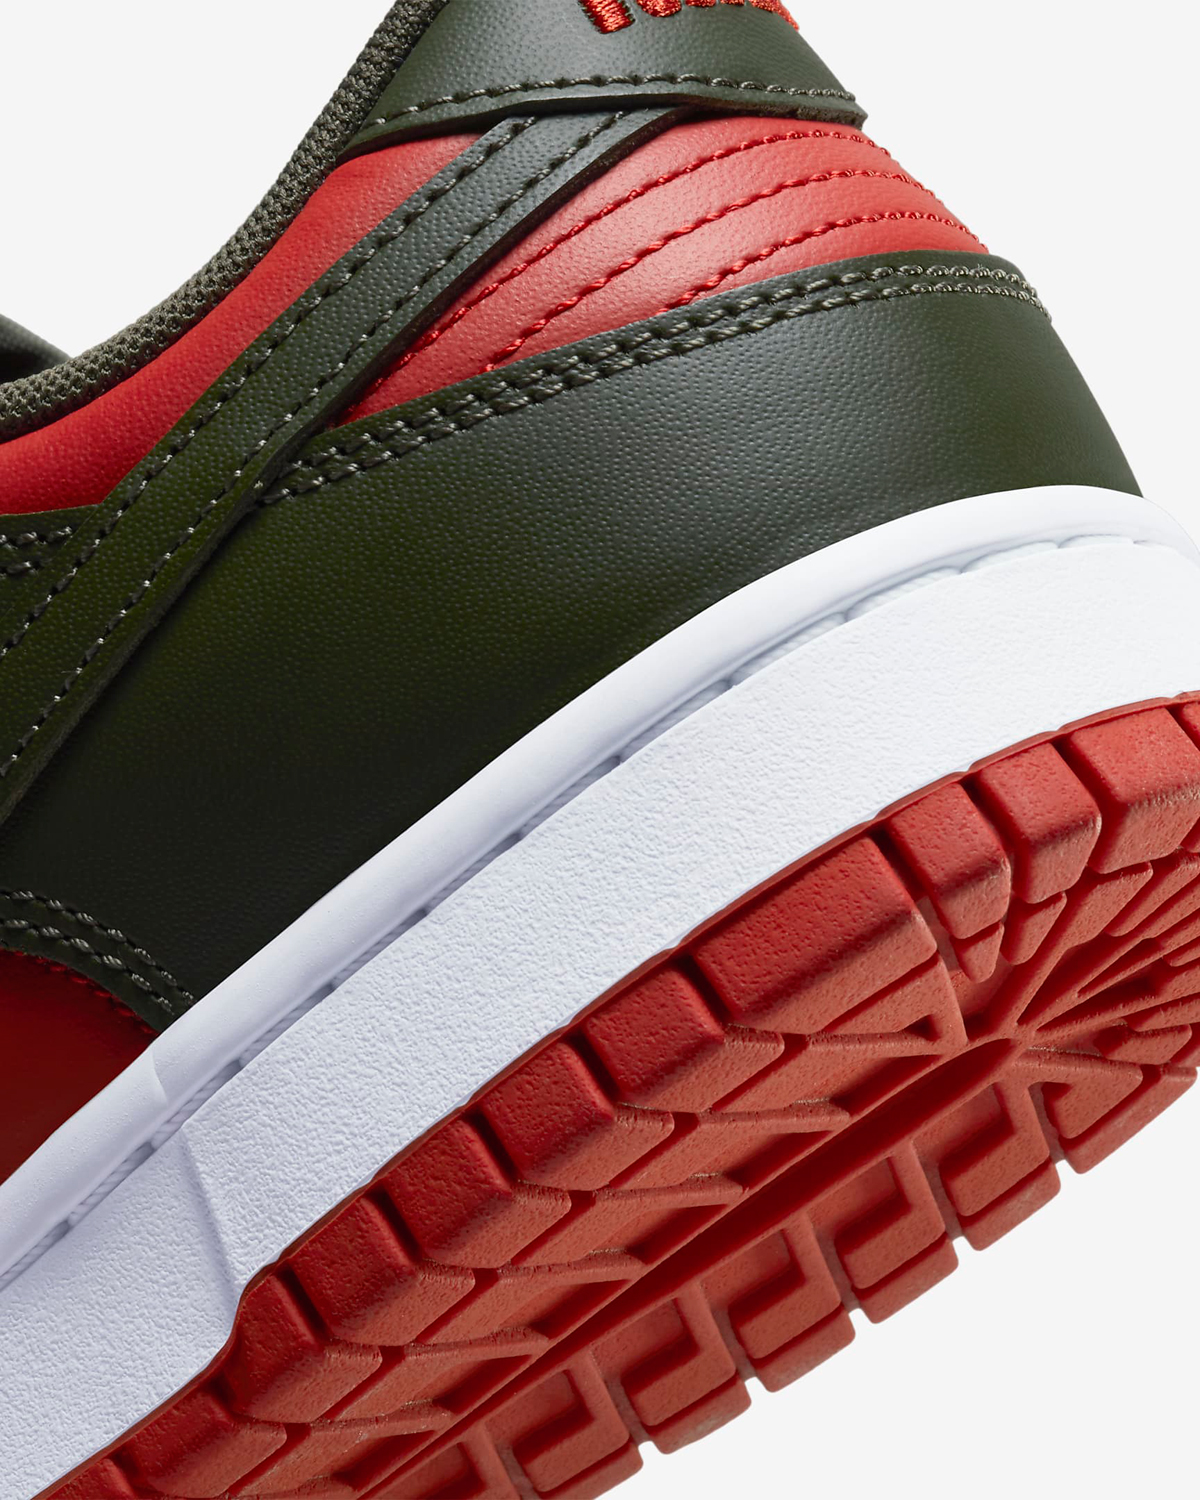 Nike-Dunk-Low-Mystic-Red-Cargo-Khaki-Release-Date-8